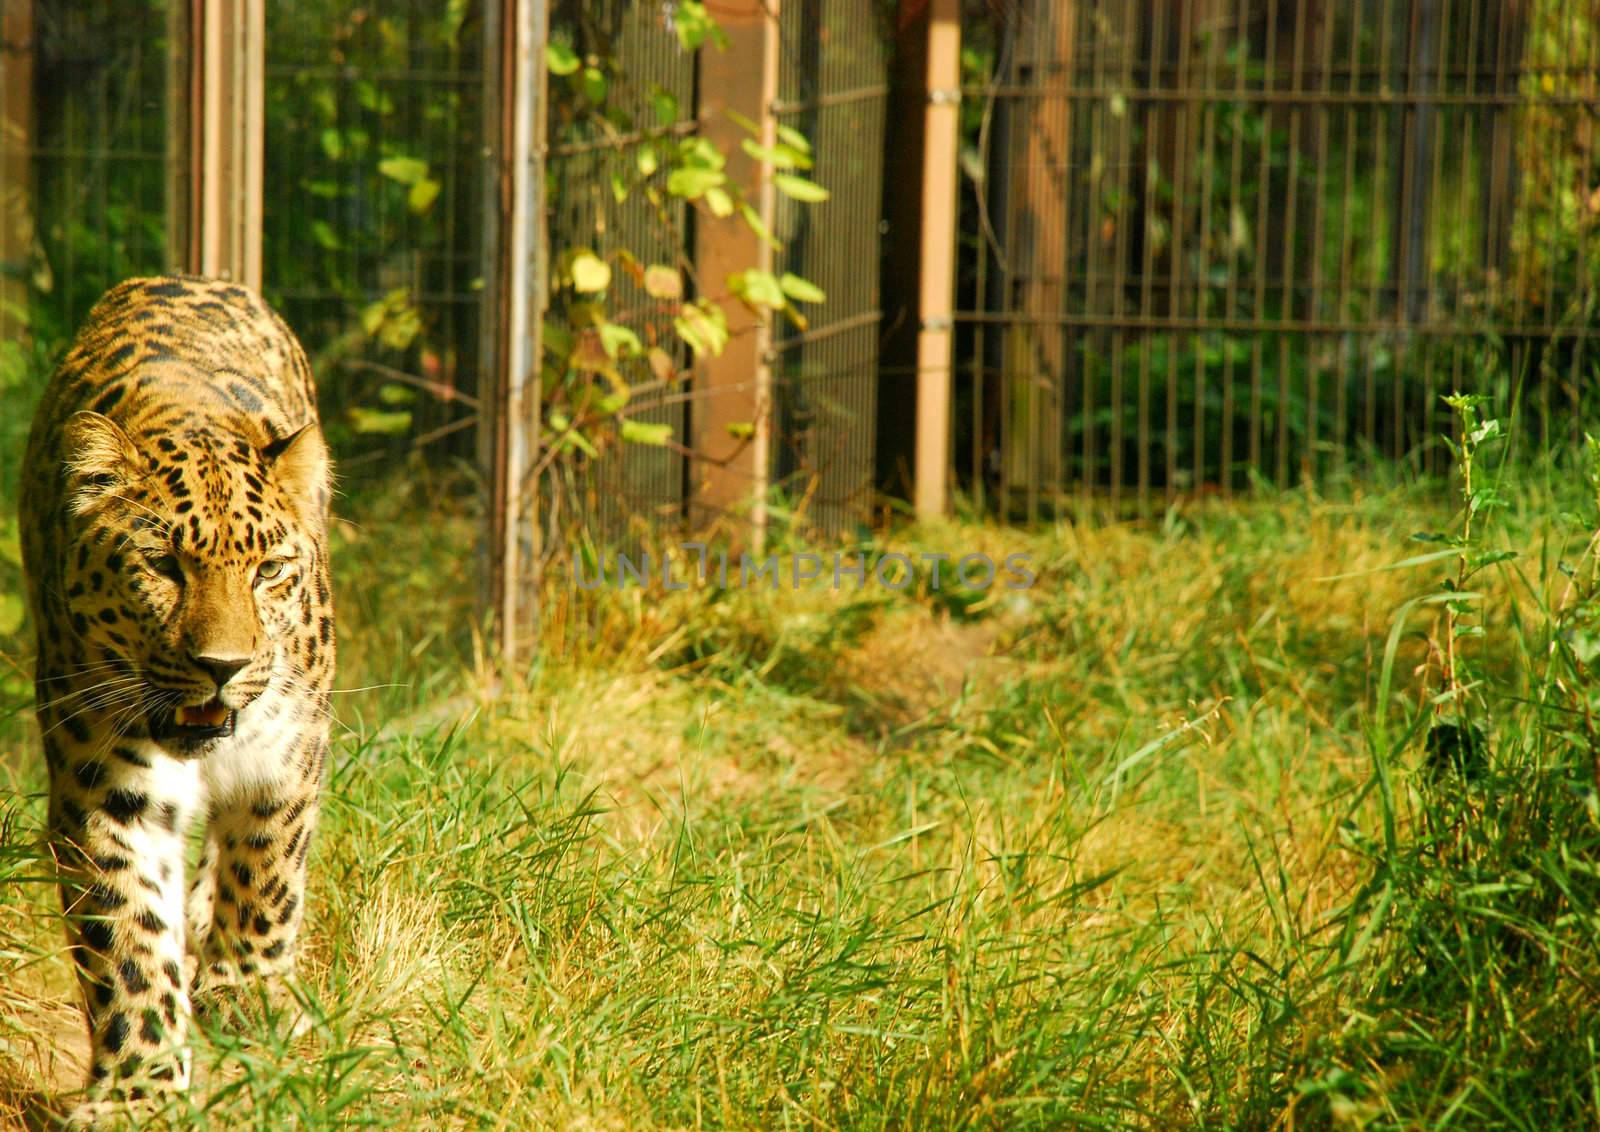 A beautiful cheetah lighted by the sun in helsinki's zoo. it's walking peacefully, has beautiful green eyes.